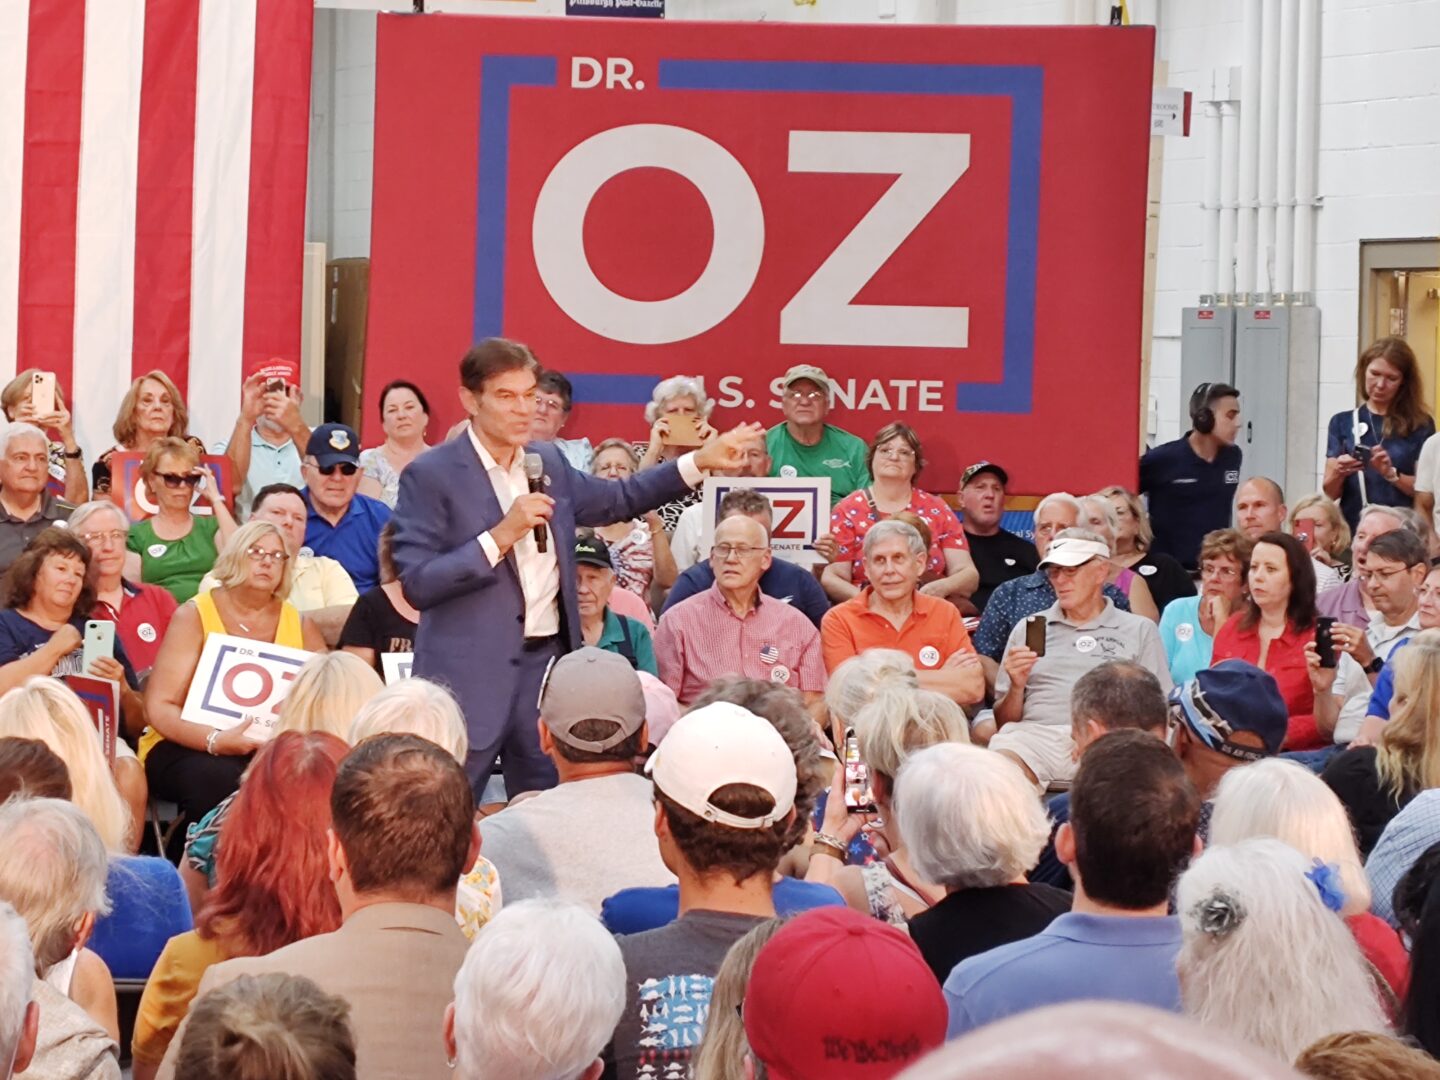 Senate candidate Mehmet Oz speaks with supporters at an Aug. 29, 2022 town hall in Monroeville
